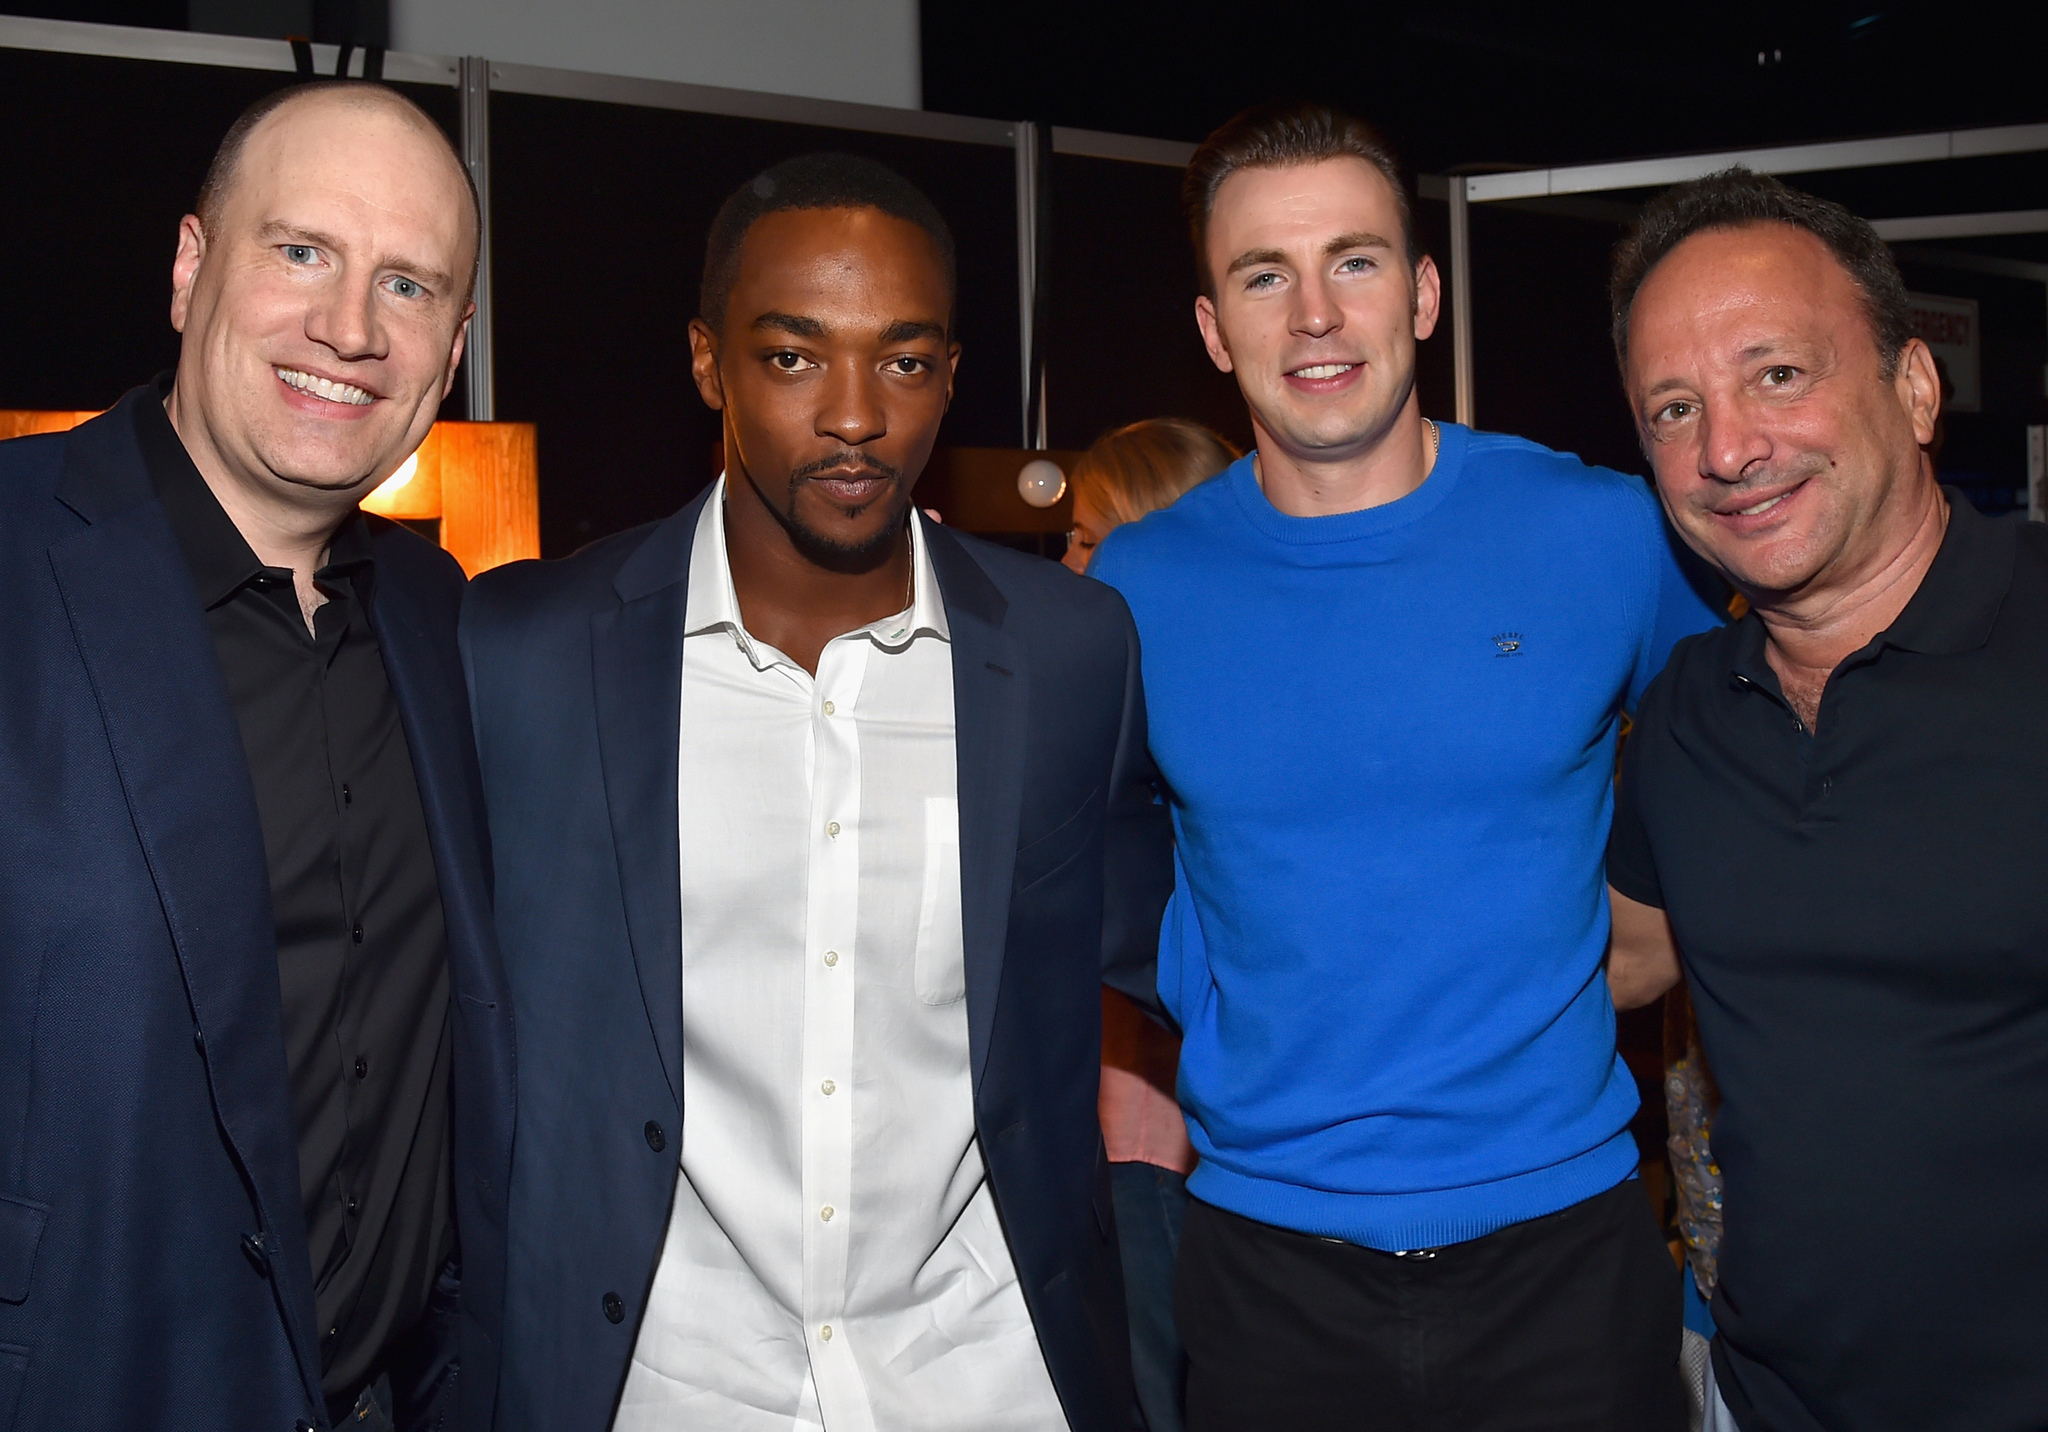 Louis D'Esposito, Chris Evans, Kevin Feige and Anthony Mackie at event of Captain America: Civil War (2016)